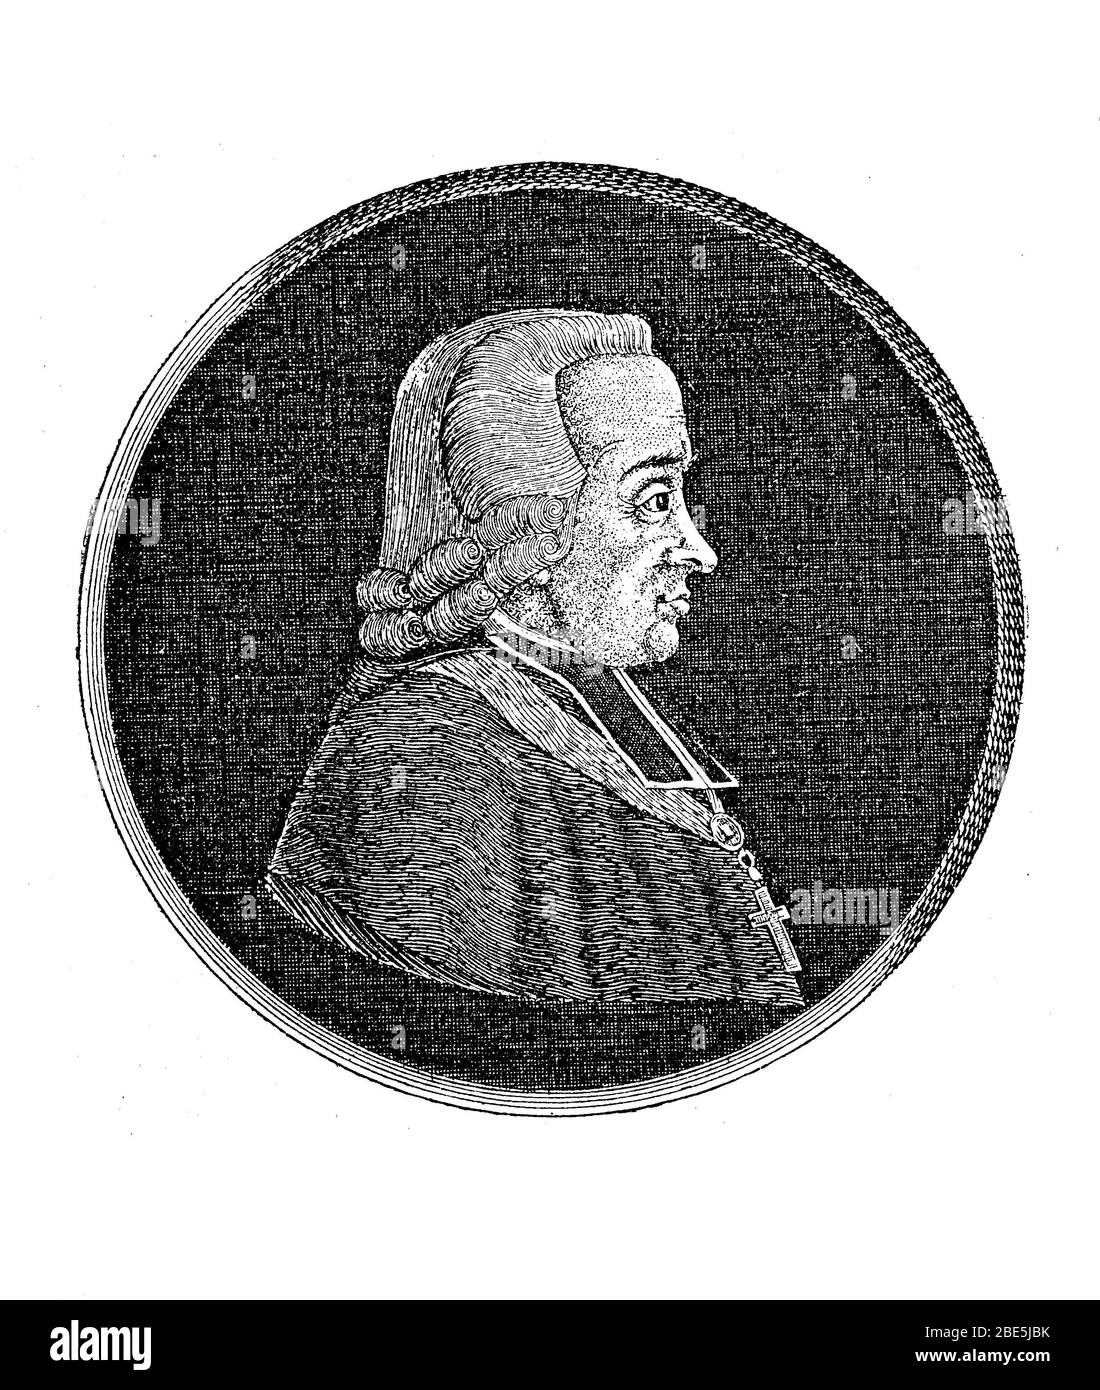 Johann Nikolaus von Hontheim, 27 January 1701 -2 September 1790, was a Catholic auxiliary bishop and critic of the Pope's position in the Catholic Church. He also stood out under the pseudonym Justinus Febronius as a representative of the Catholic Enlightenment  /  Johann Nikolaus von Hontheim, 27. Januar 1701 -2. September 1790, war katholischer Weihbischof und Kritiker der Stellung des Papstes in der Katholischen Kirche. Er trat auch unter dem Pseudonym Justinus Febronius als Vertreter der Katholischen Aufklärung hervor, Historisch, digital improved reproduction of an original from the 19th Stock Photo